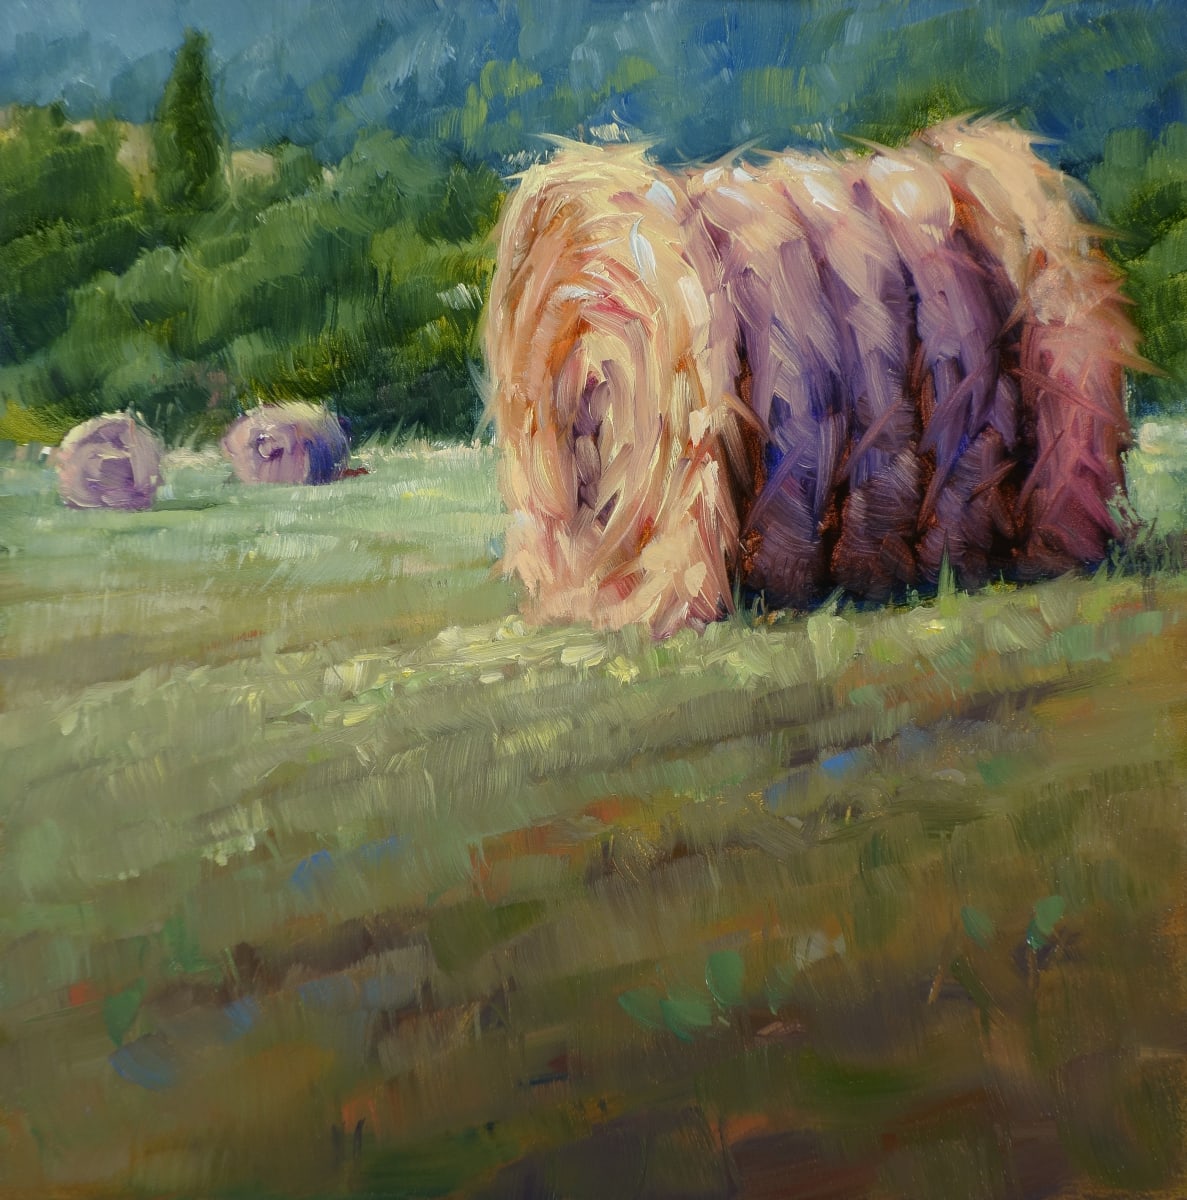 Hay on The Way #2 by Sonia Kane 